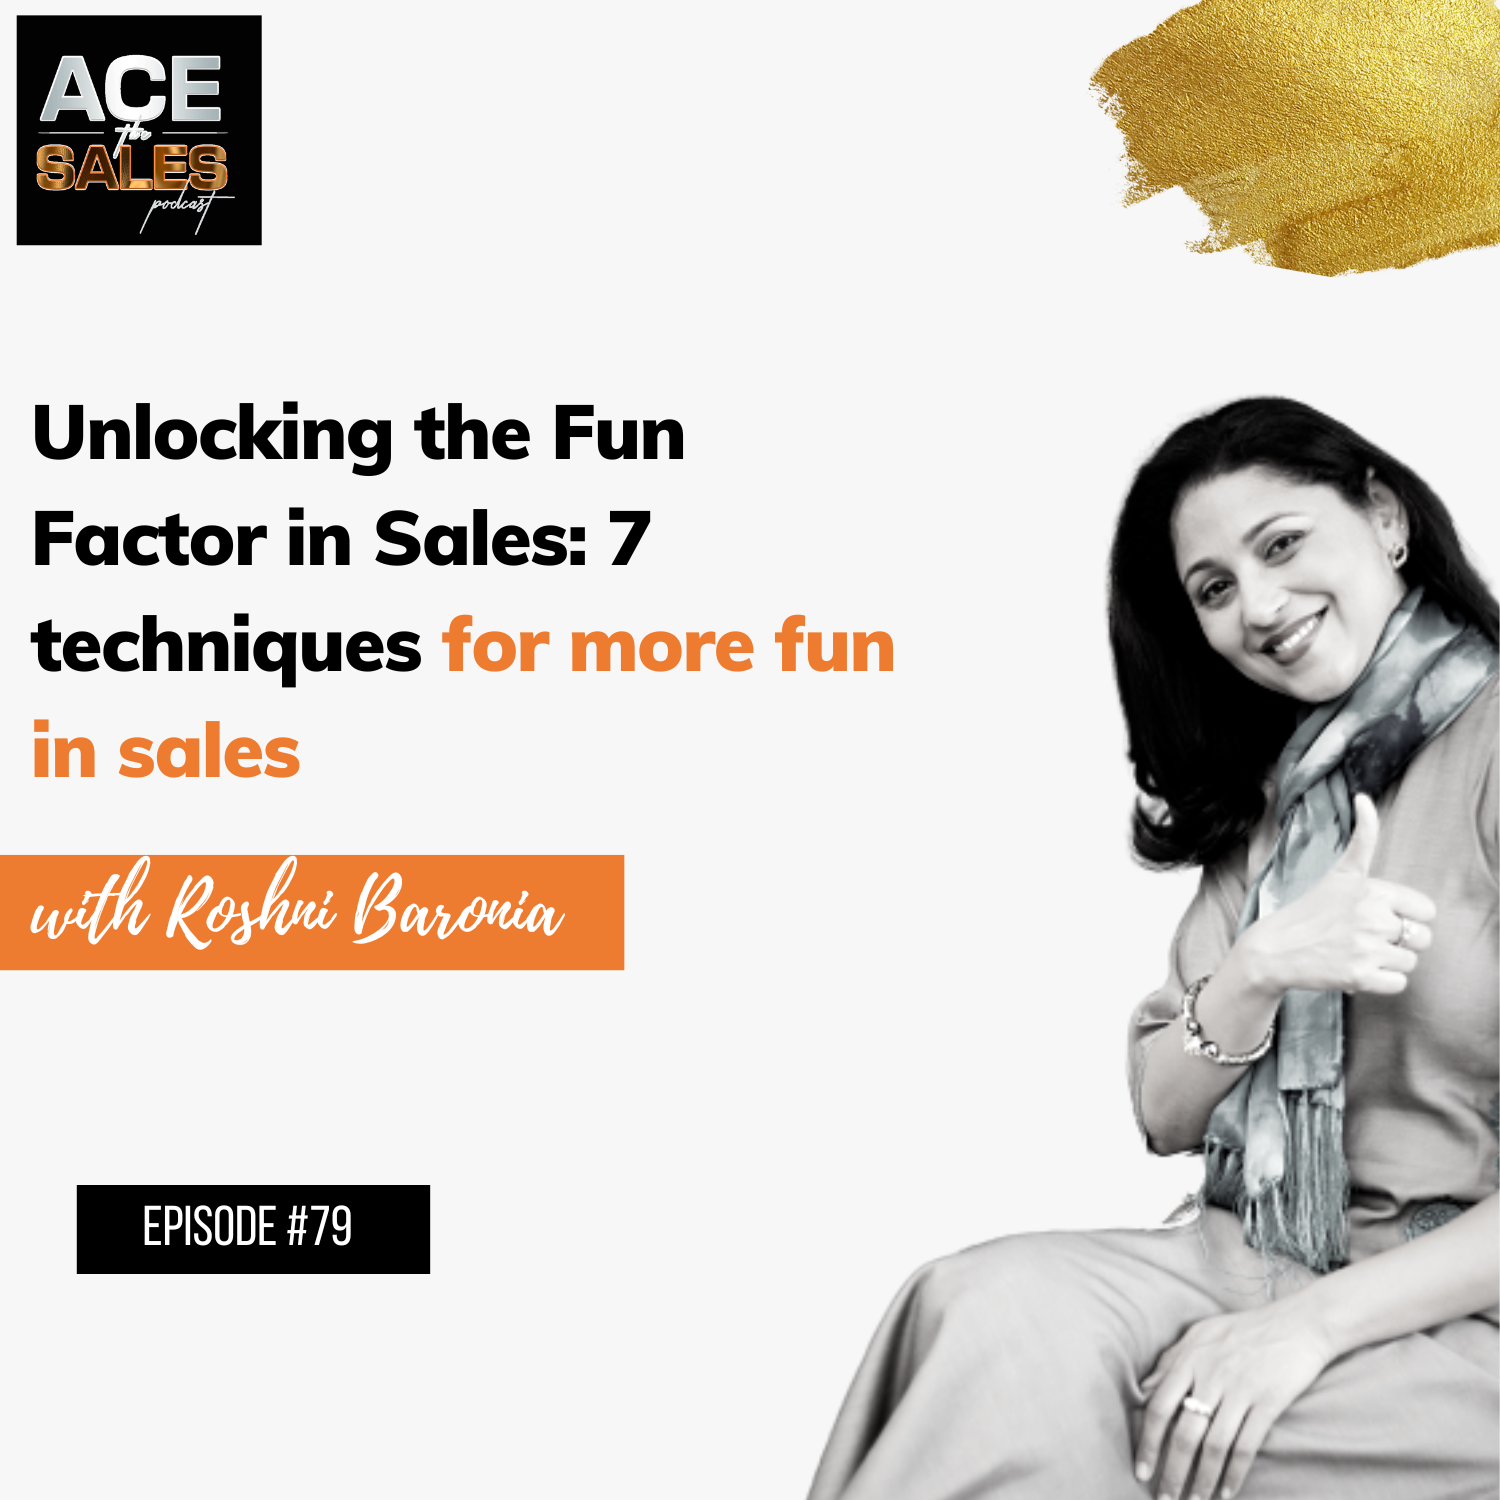 Unlocking the Fun Factor in Sales: 7 techniques for more fun in sales